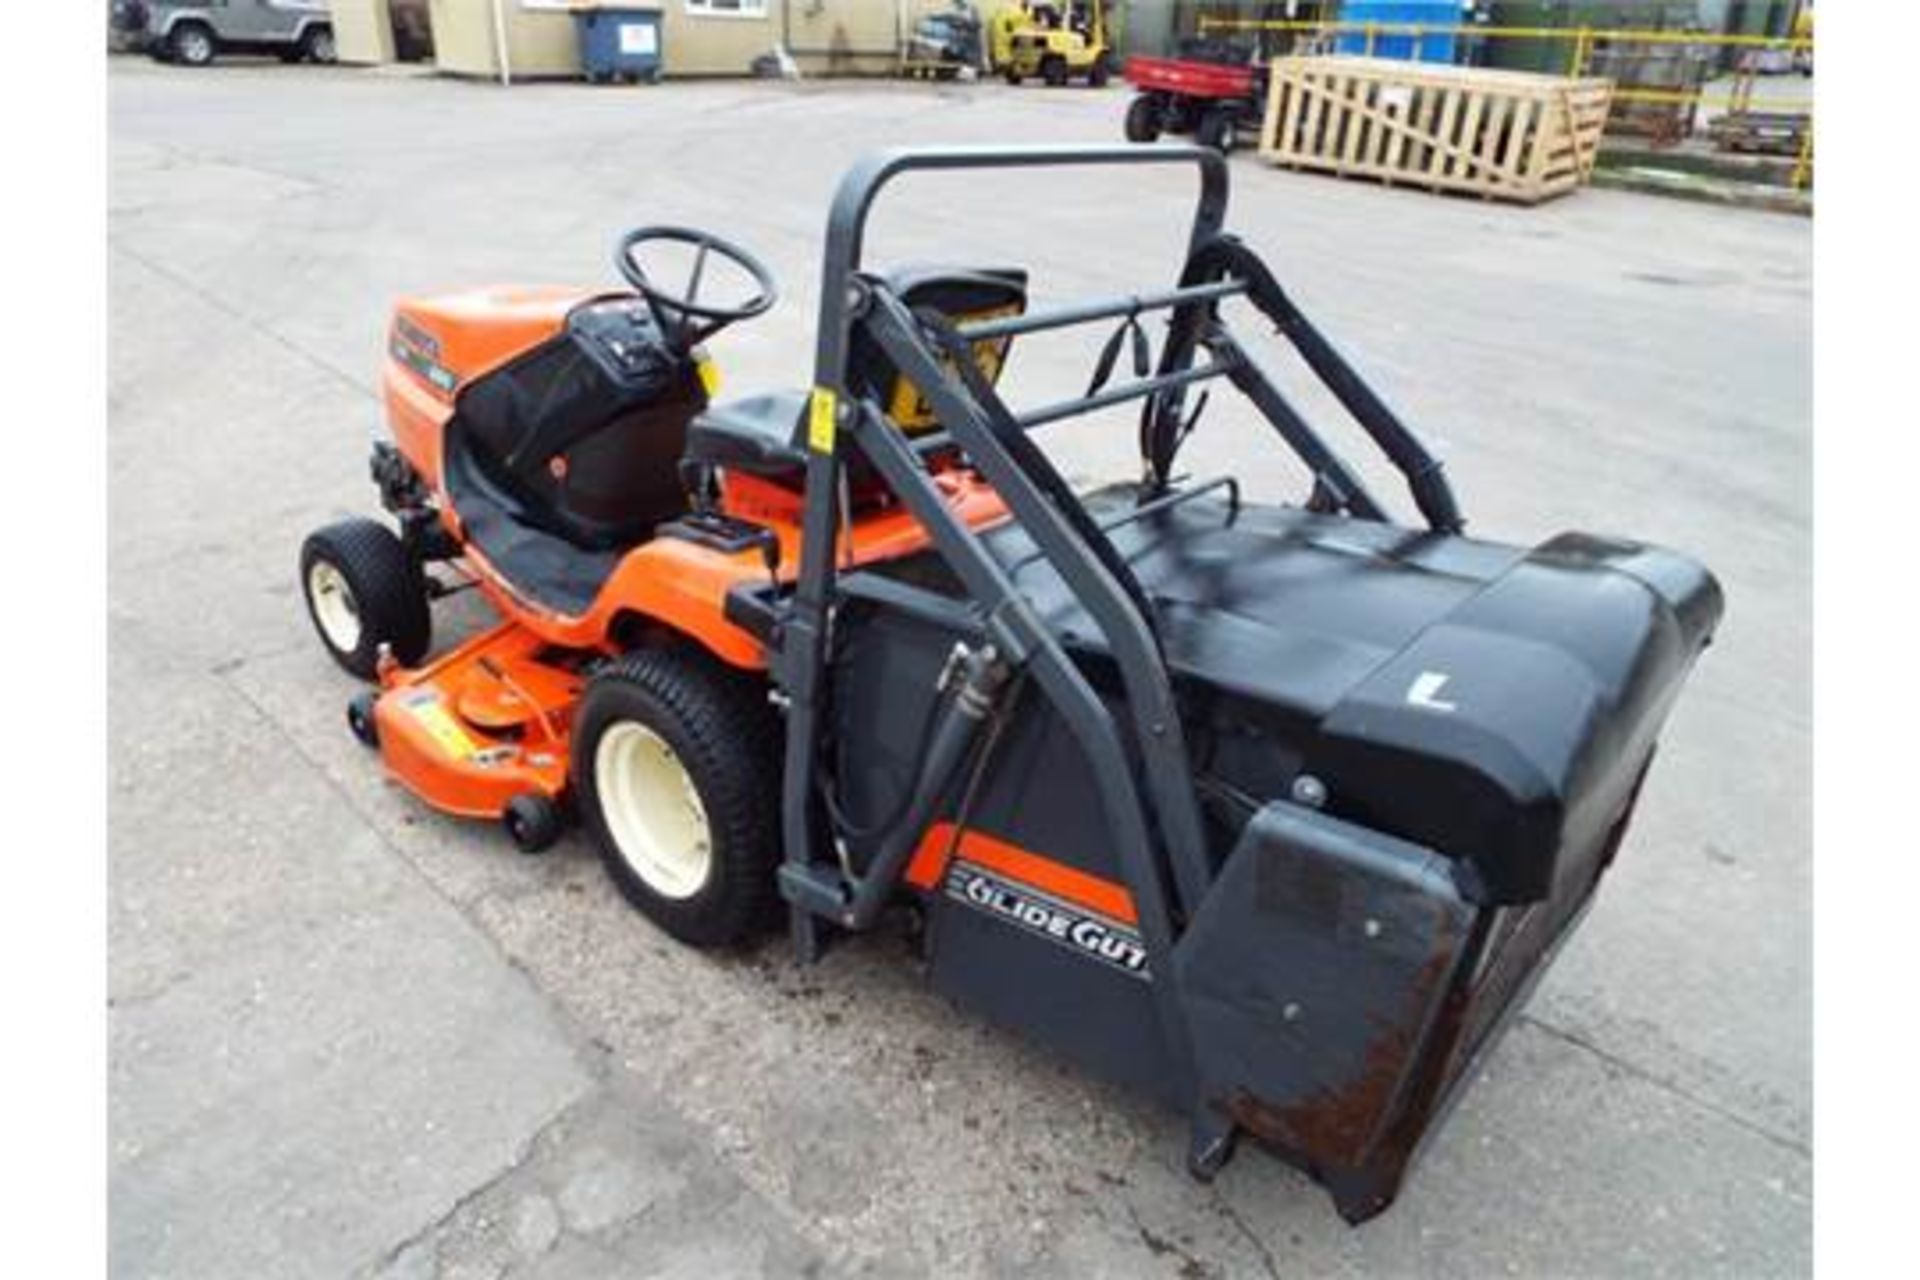 2008 Kubota G21 Ride On Mower with Glide-Cut System and High Dump Grass Collector - Image 8 of 22